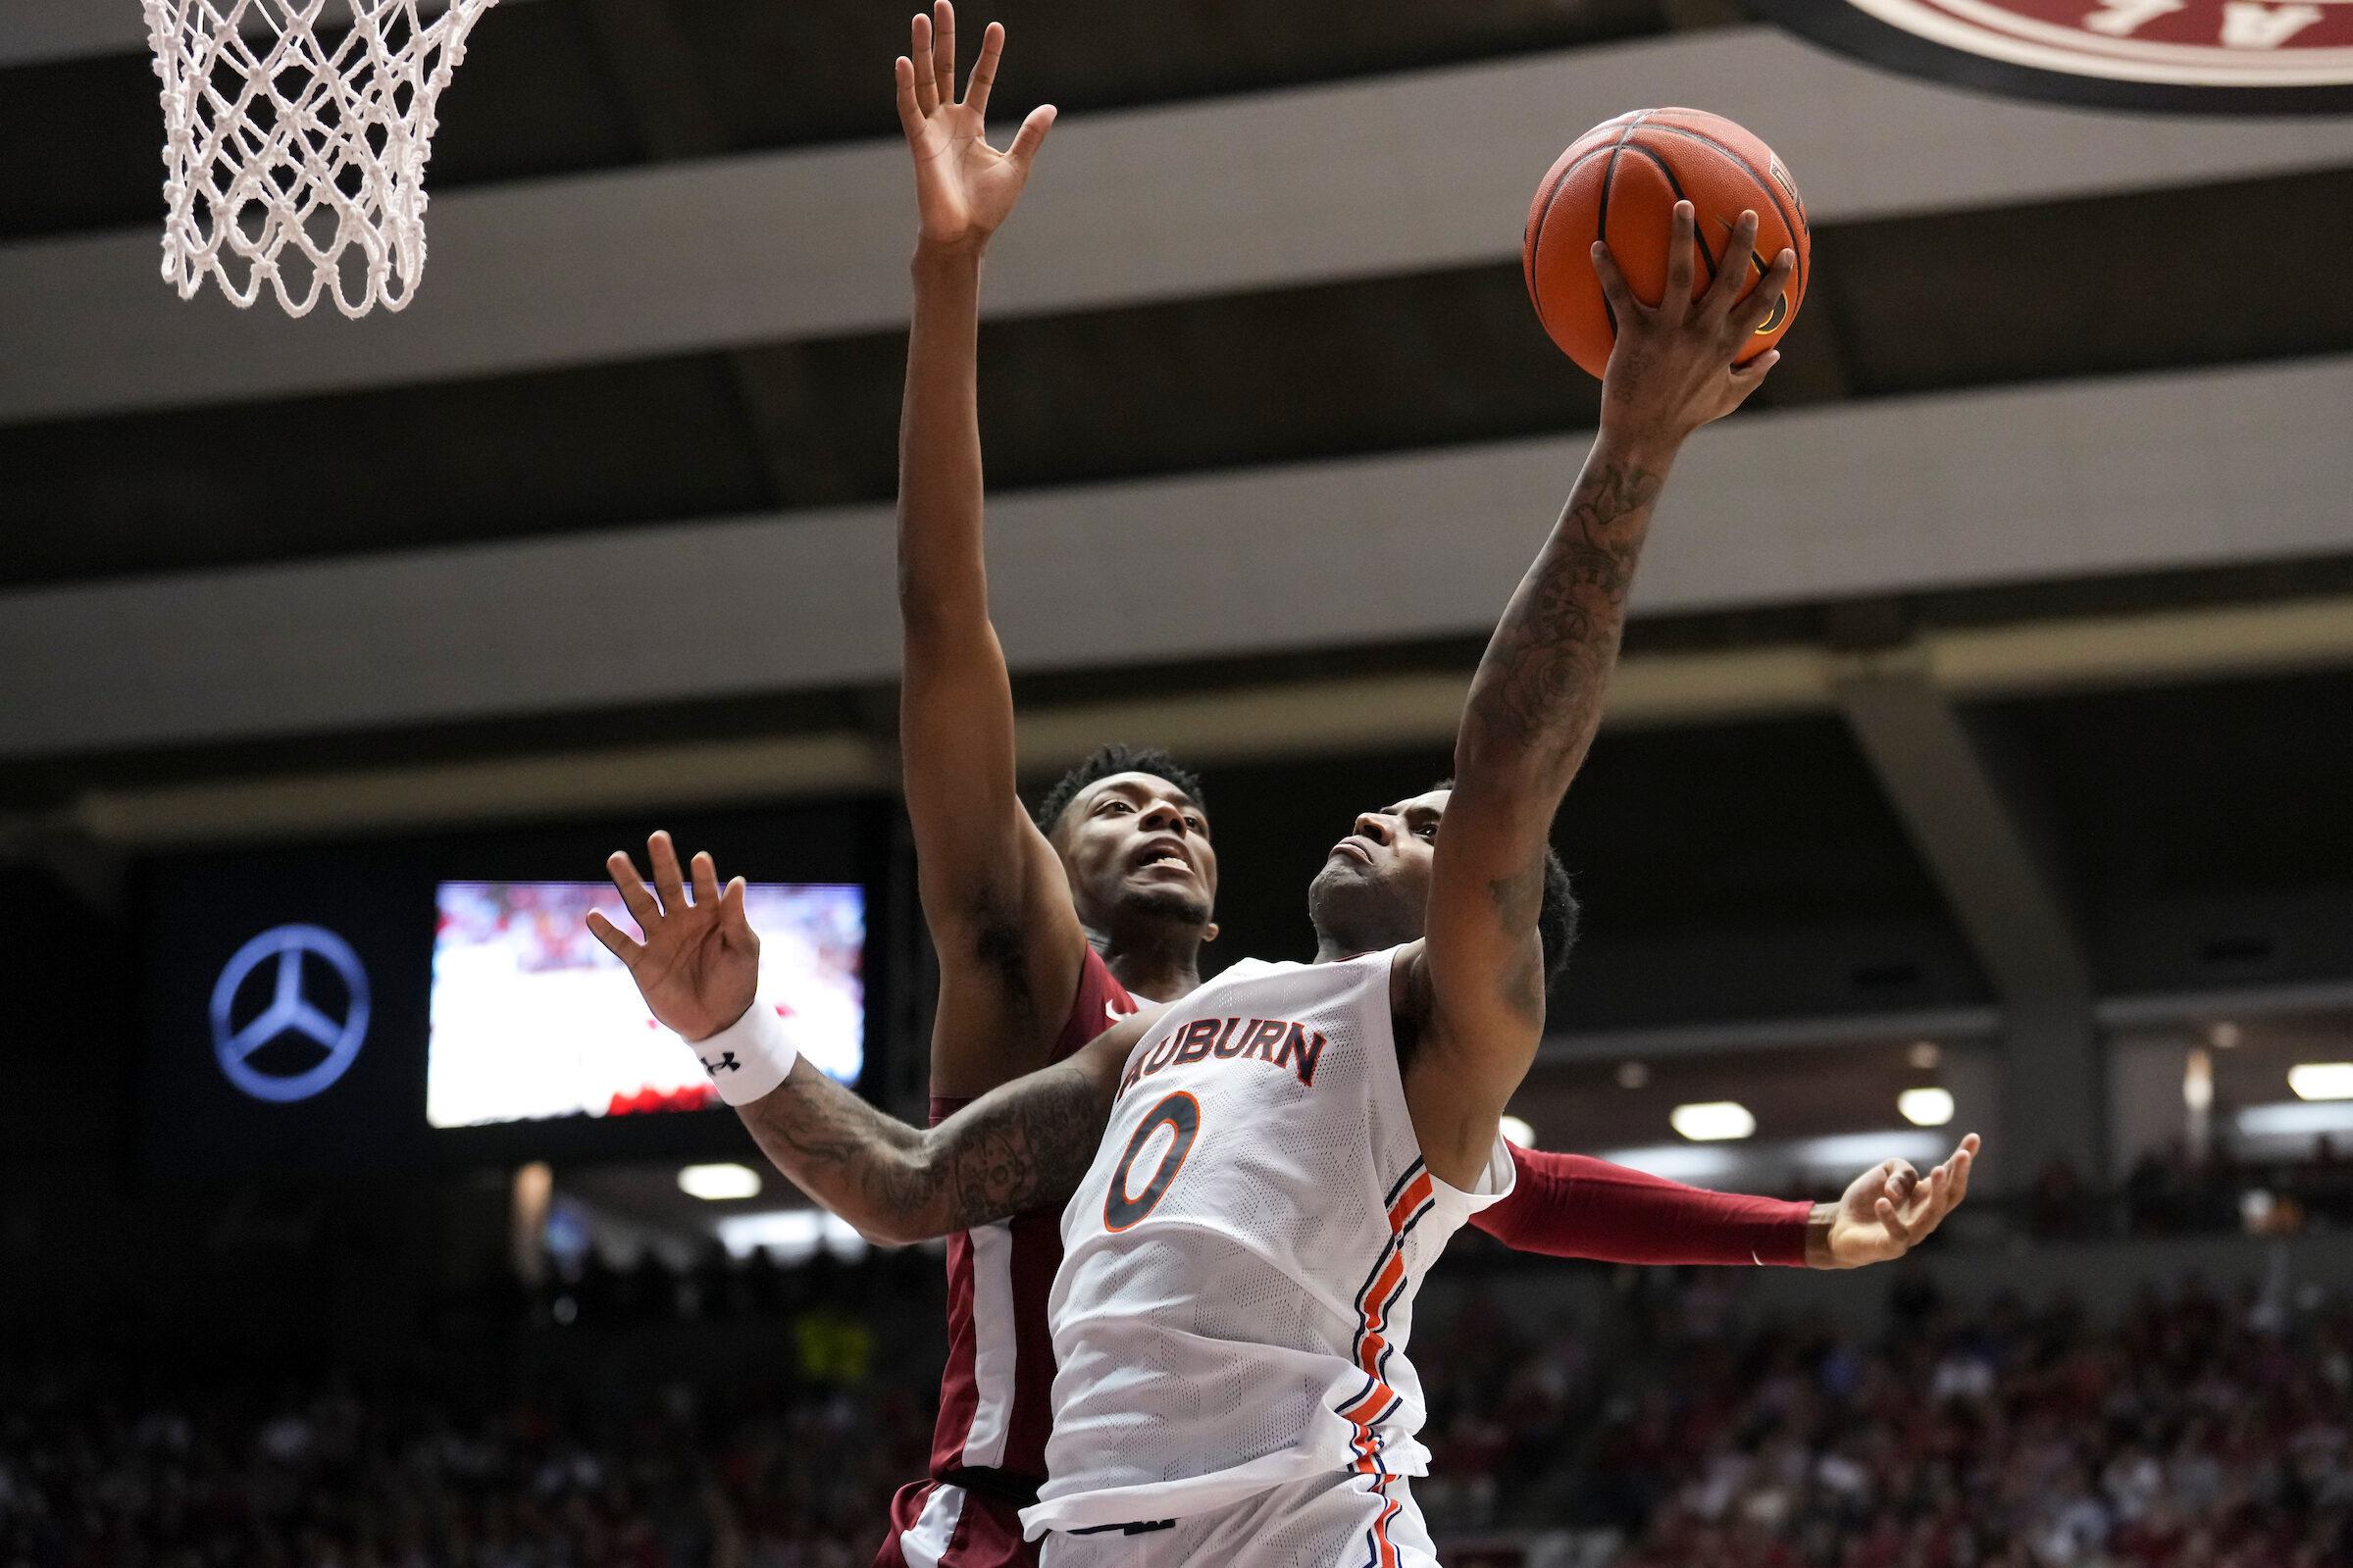 K.D. Johnson (0) during the game between the Alabama Crimson Tide and the Auburn Tigers at Coleman Coliseum in Tuscaloosa, AL on Wednesday, Mar 1, 2023. Steven Leonard/Auburn Tigers